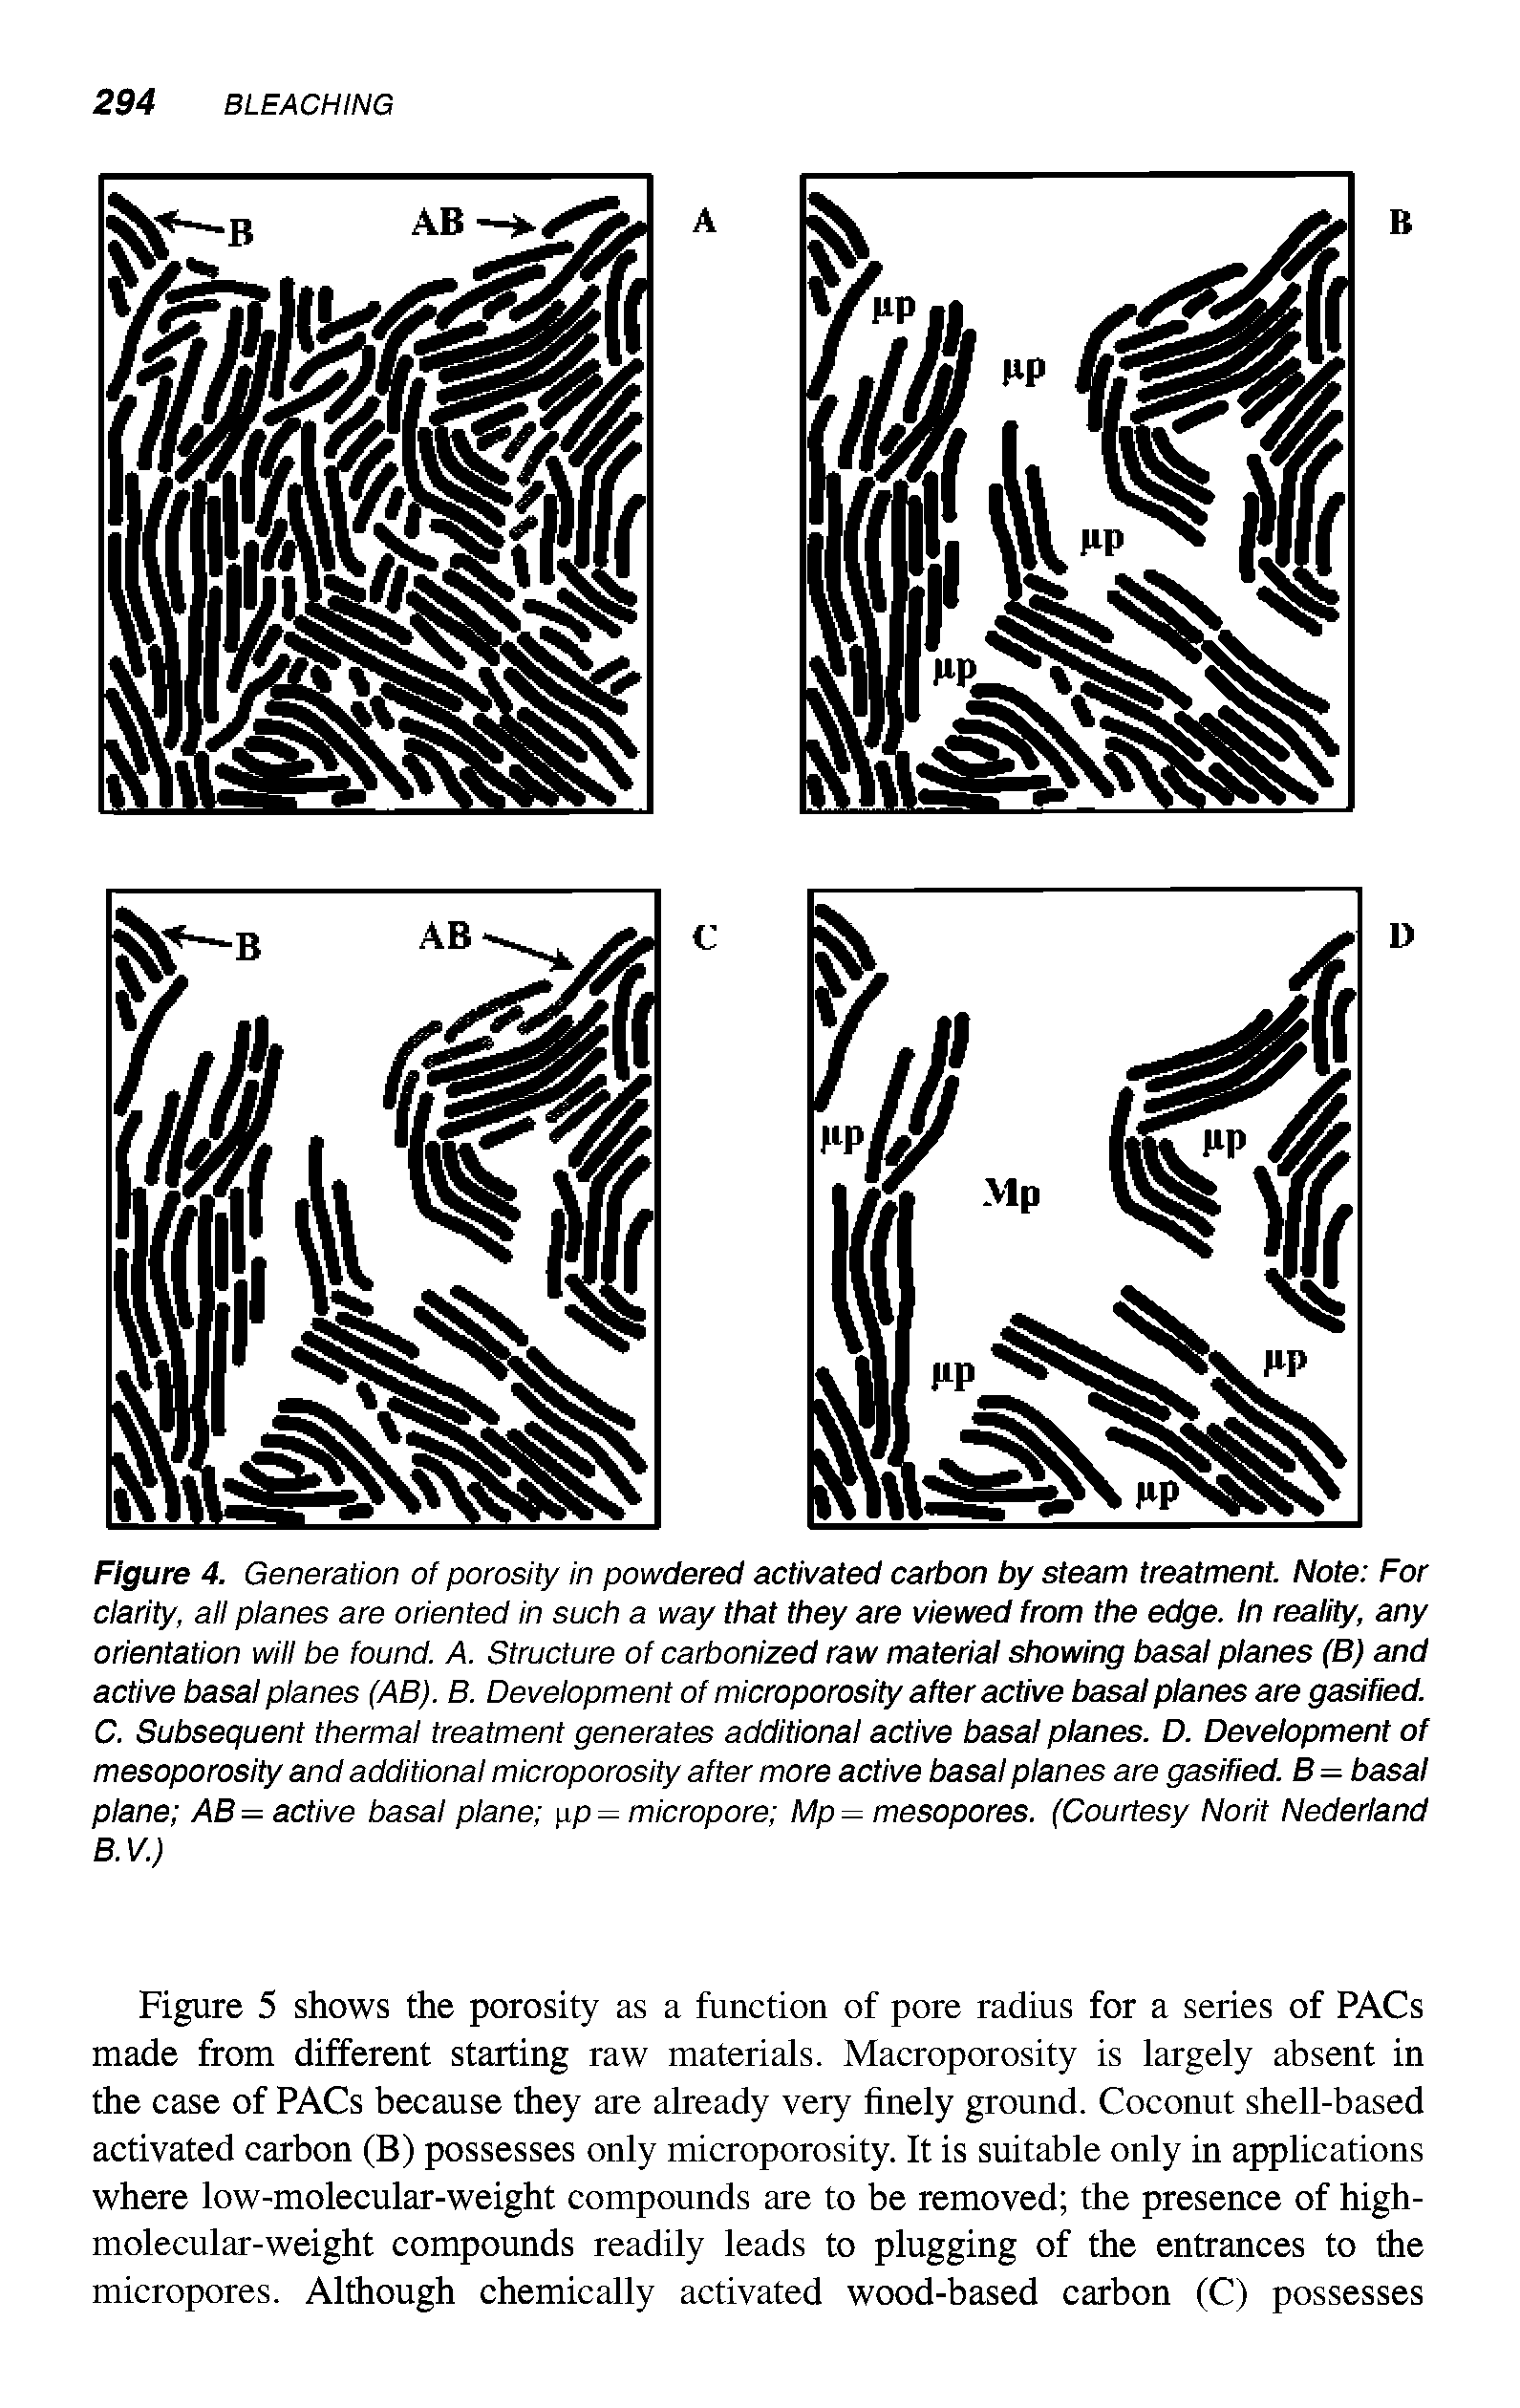 Figure 4. Generation of porosity in powdered activated carbon by steam treatment. Note For clarity, all planes are oriented in such a way that they are viewed from the edge. In reality, any orientation will be found. A. Structure of carbonized raw material showing basal planes (B) and active basal planes (AB). B. Development of microporosity after active basal planes are gasified. C. Subsequent thermal treatment generates additional active basal planes. D. Development of mesoporosity and additional microporosity after more active basal planes are gasified. B = basal plane AB= active basal plane xp = micropore Mp = mesopores. (Courtesy Norit Nederland B.V.)...